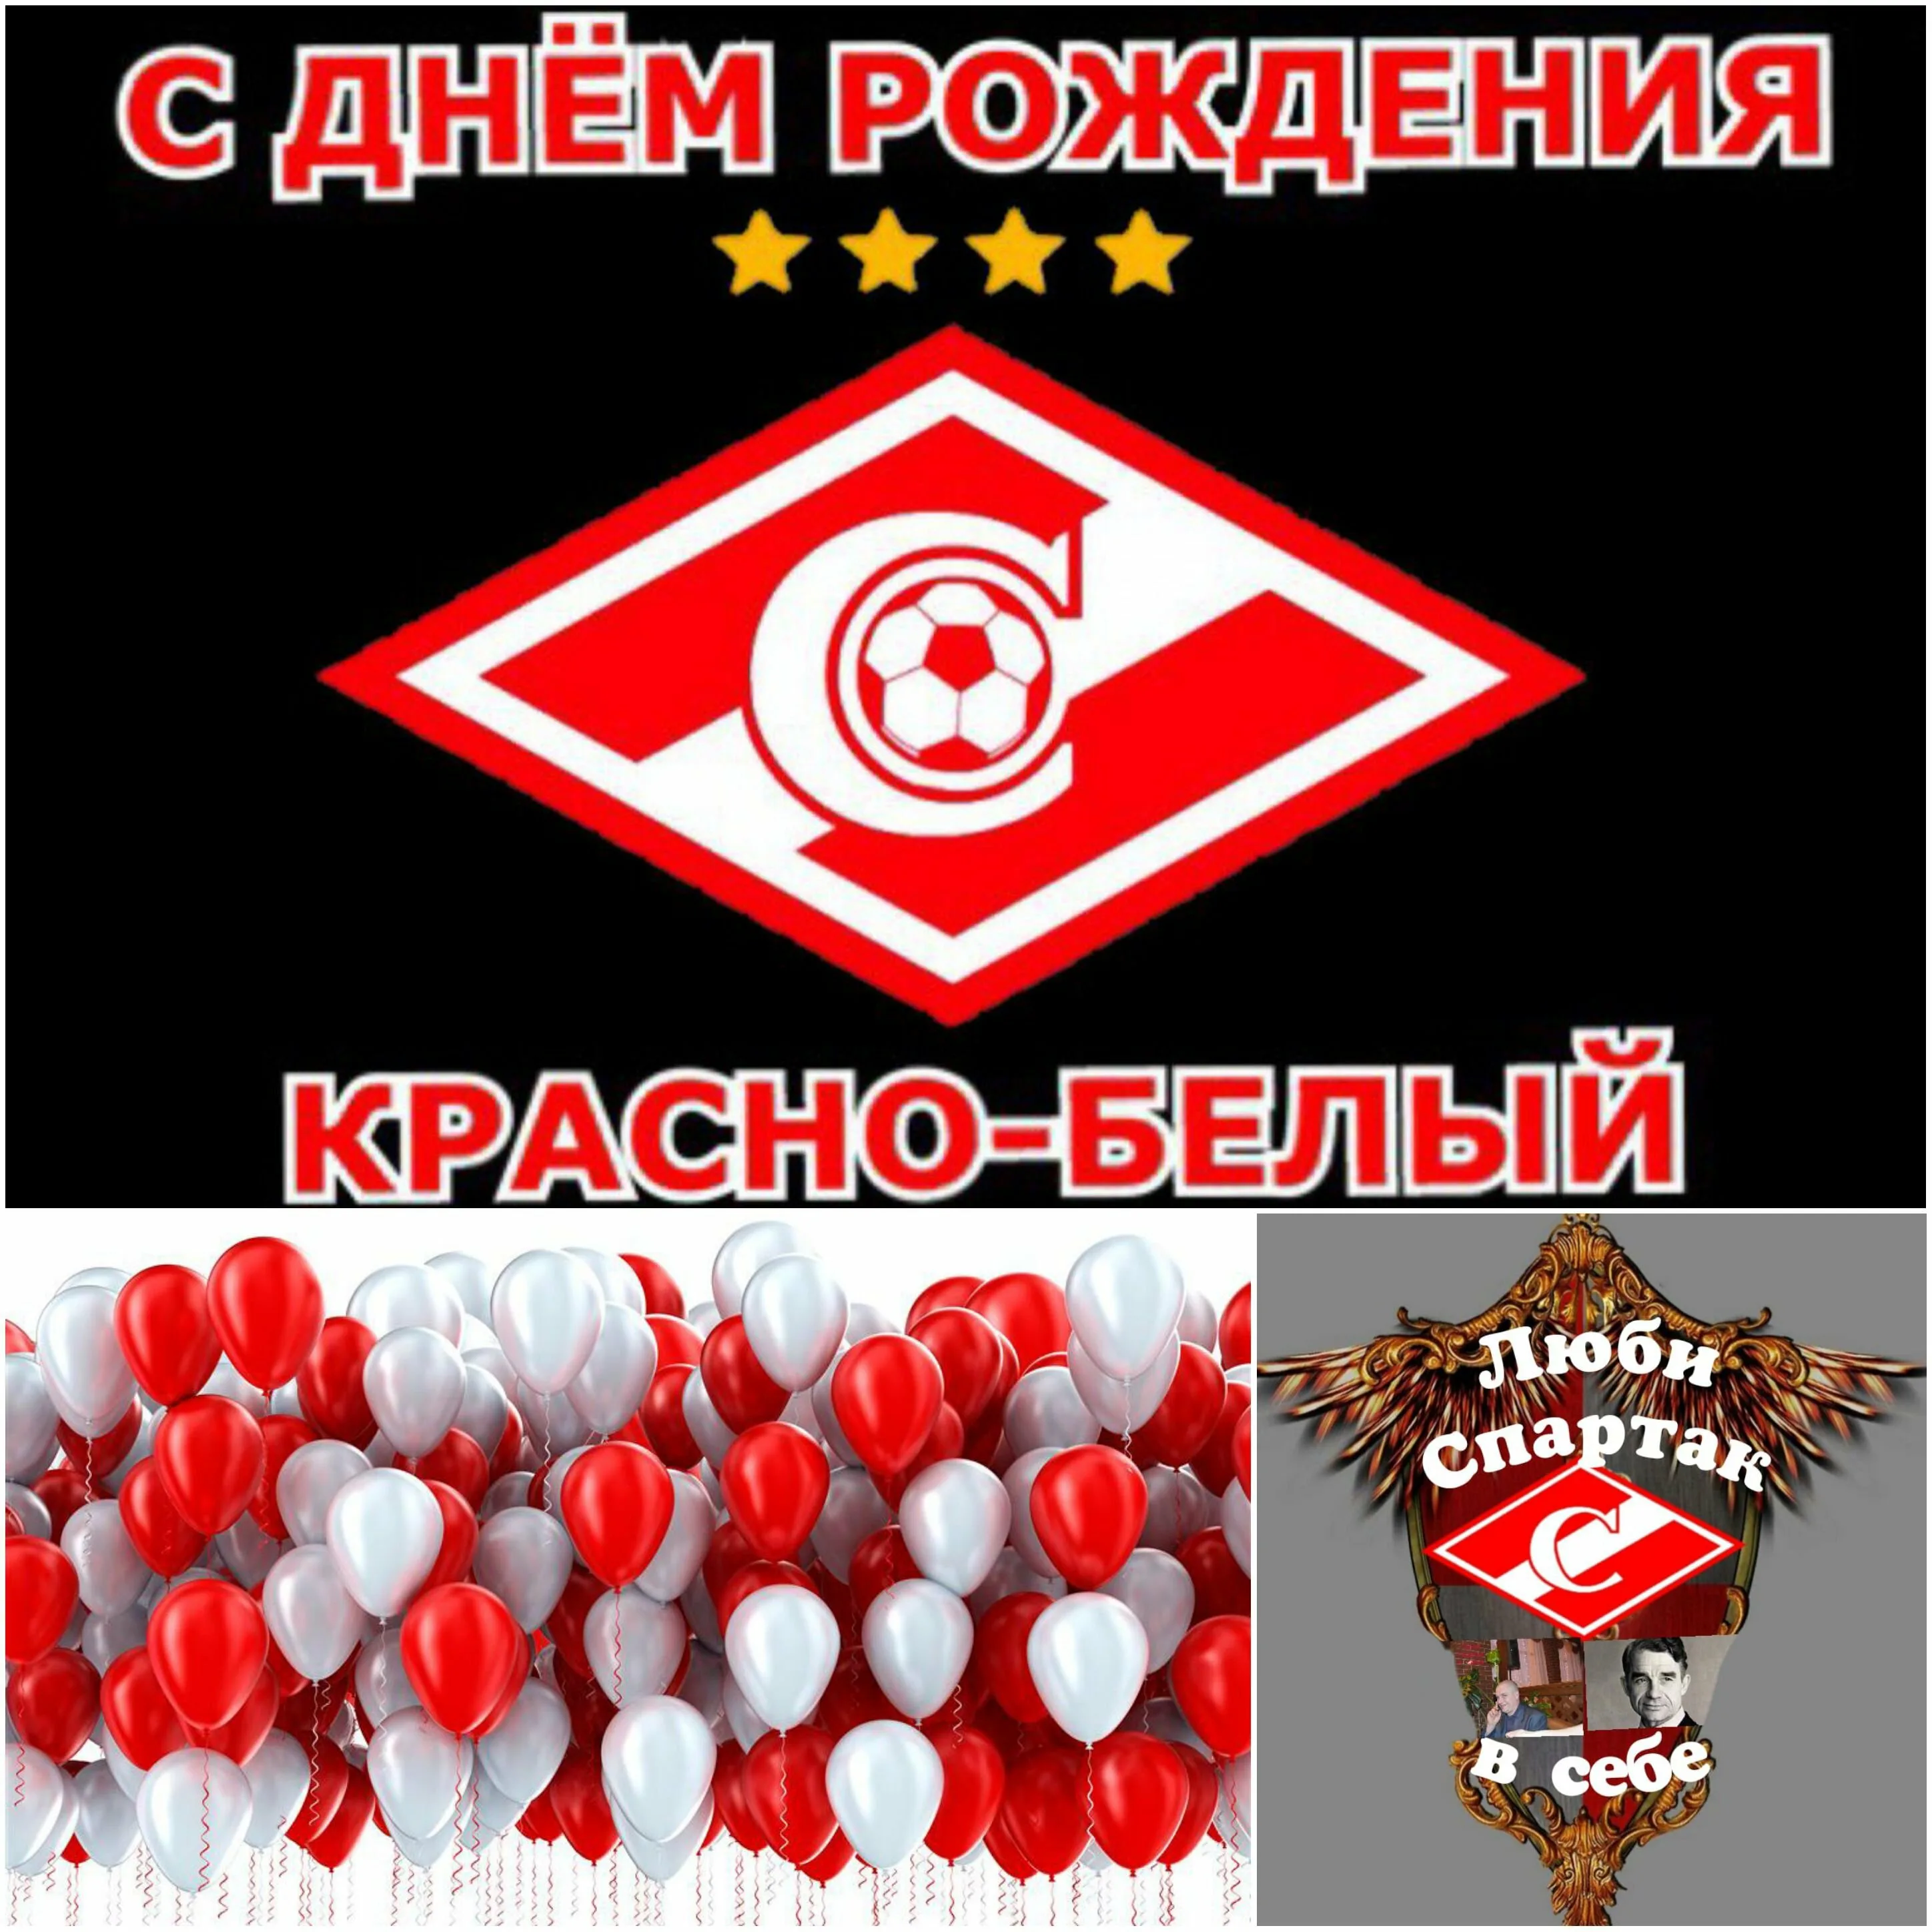 Фото Spartak's name day, congratulations to Spartak #7